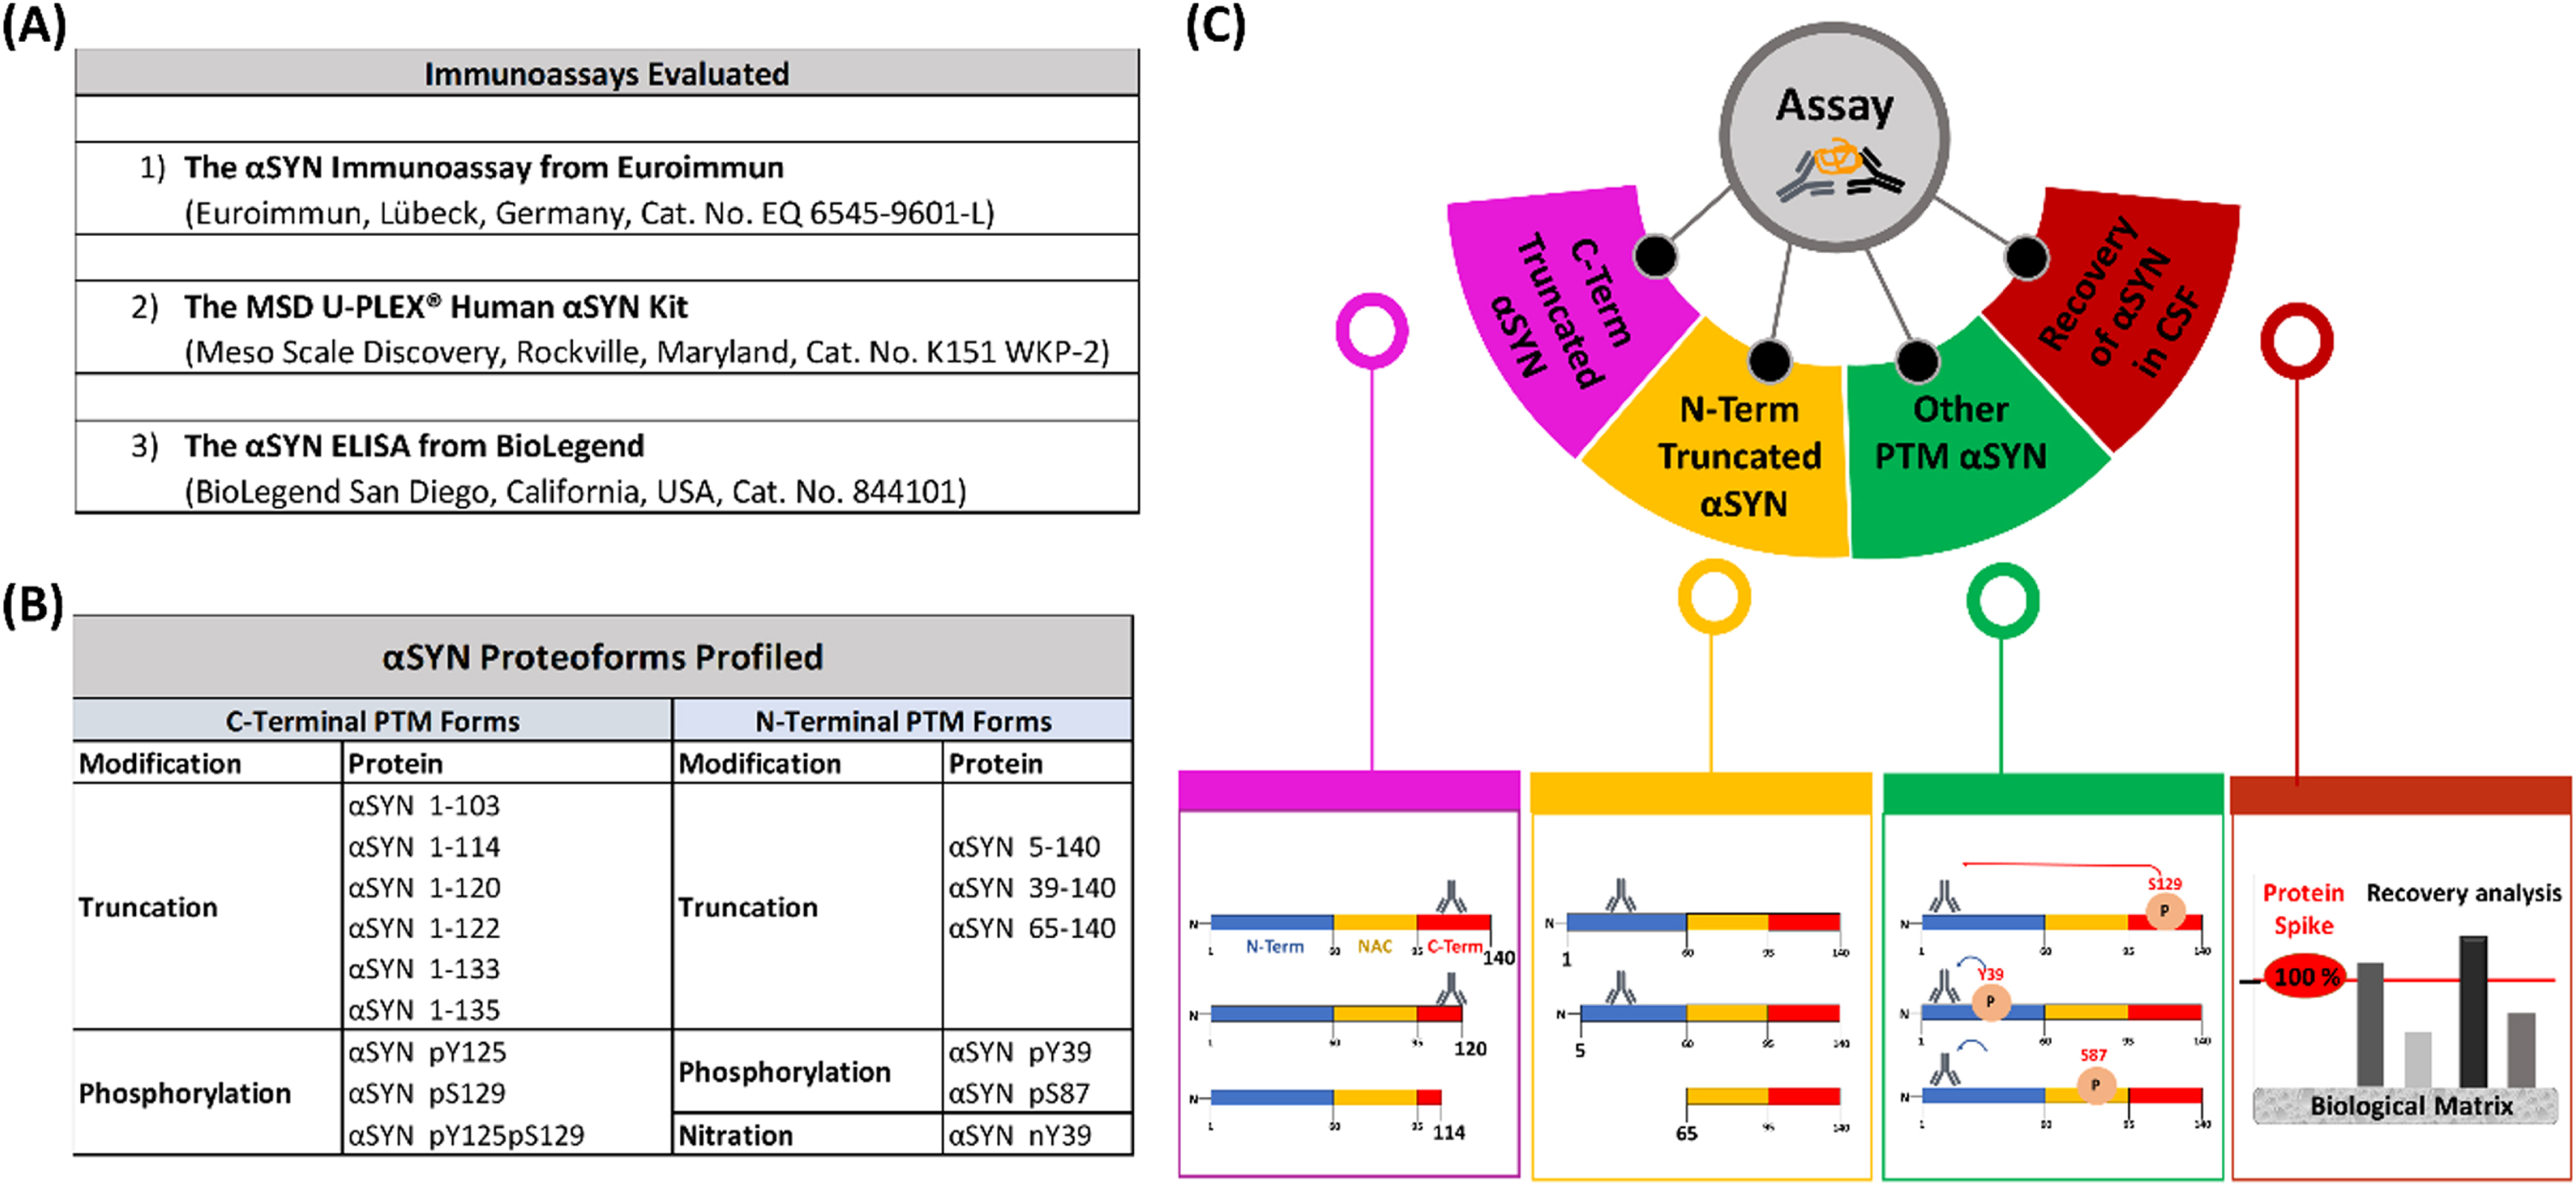 Tables of the evaluated immunoassays (A) and profiled αSYN proteins (B) and schematic depiction of the workflow (C) deployed to evaluate and characterize the three immunoassays.